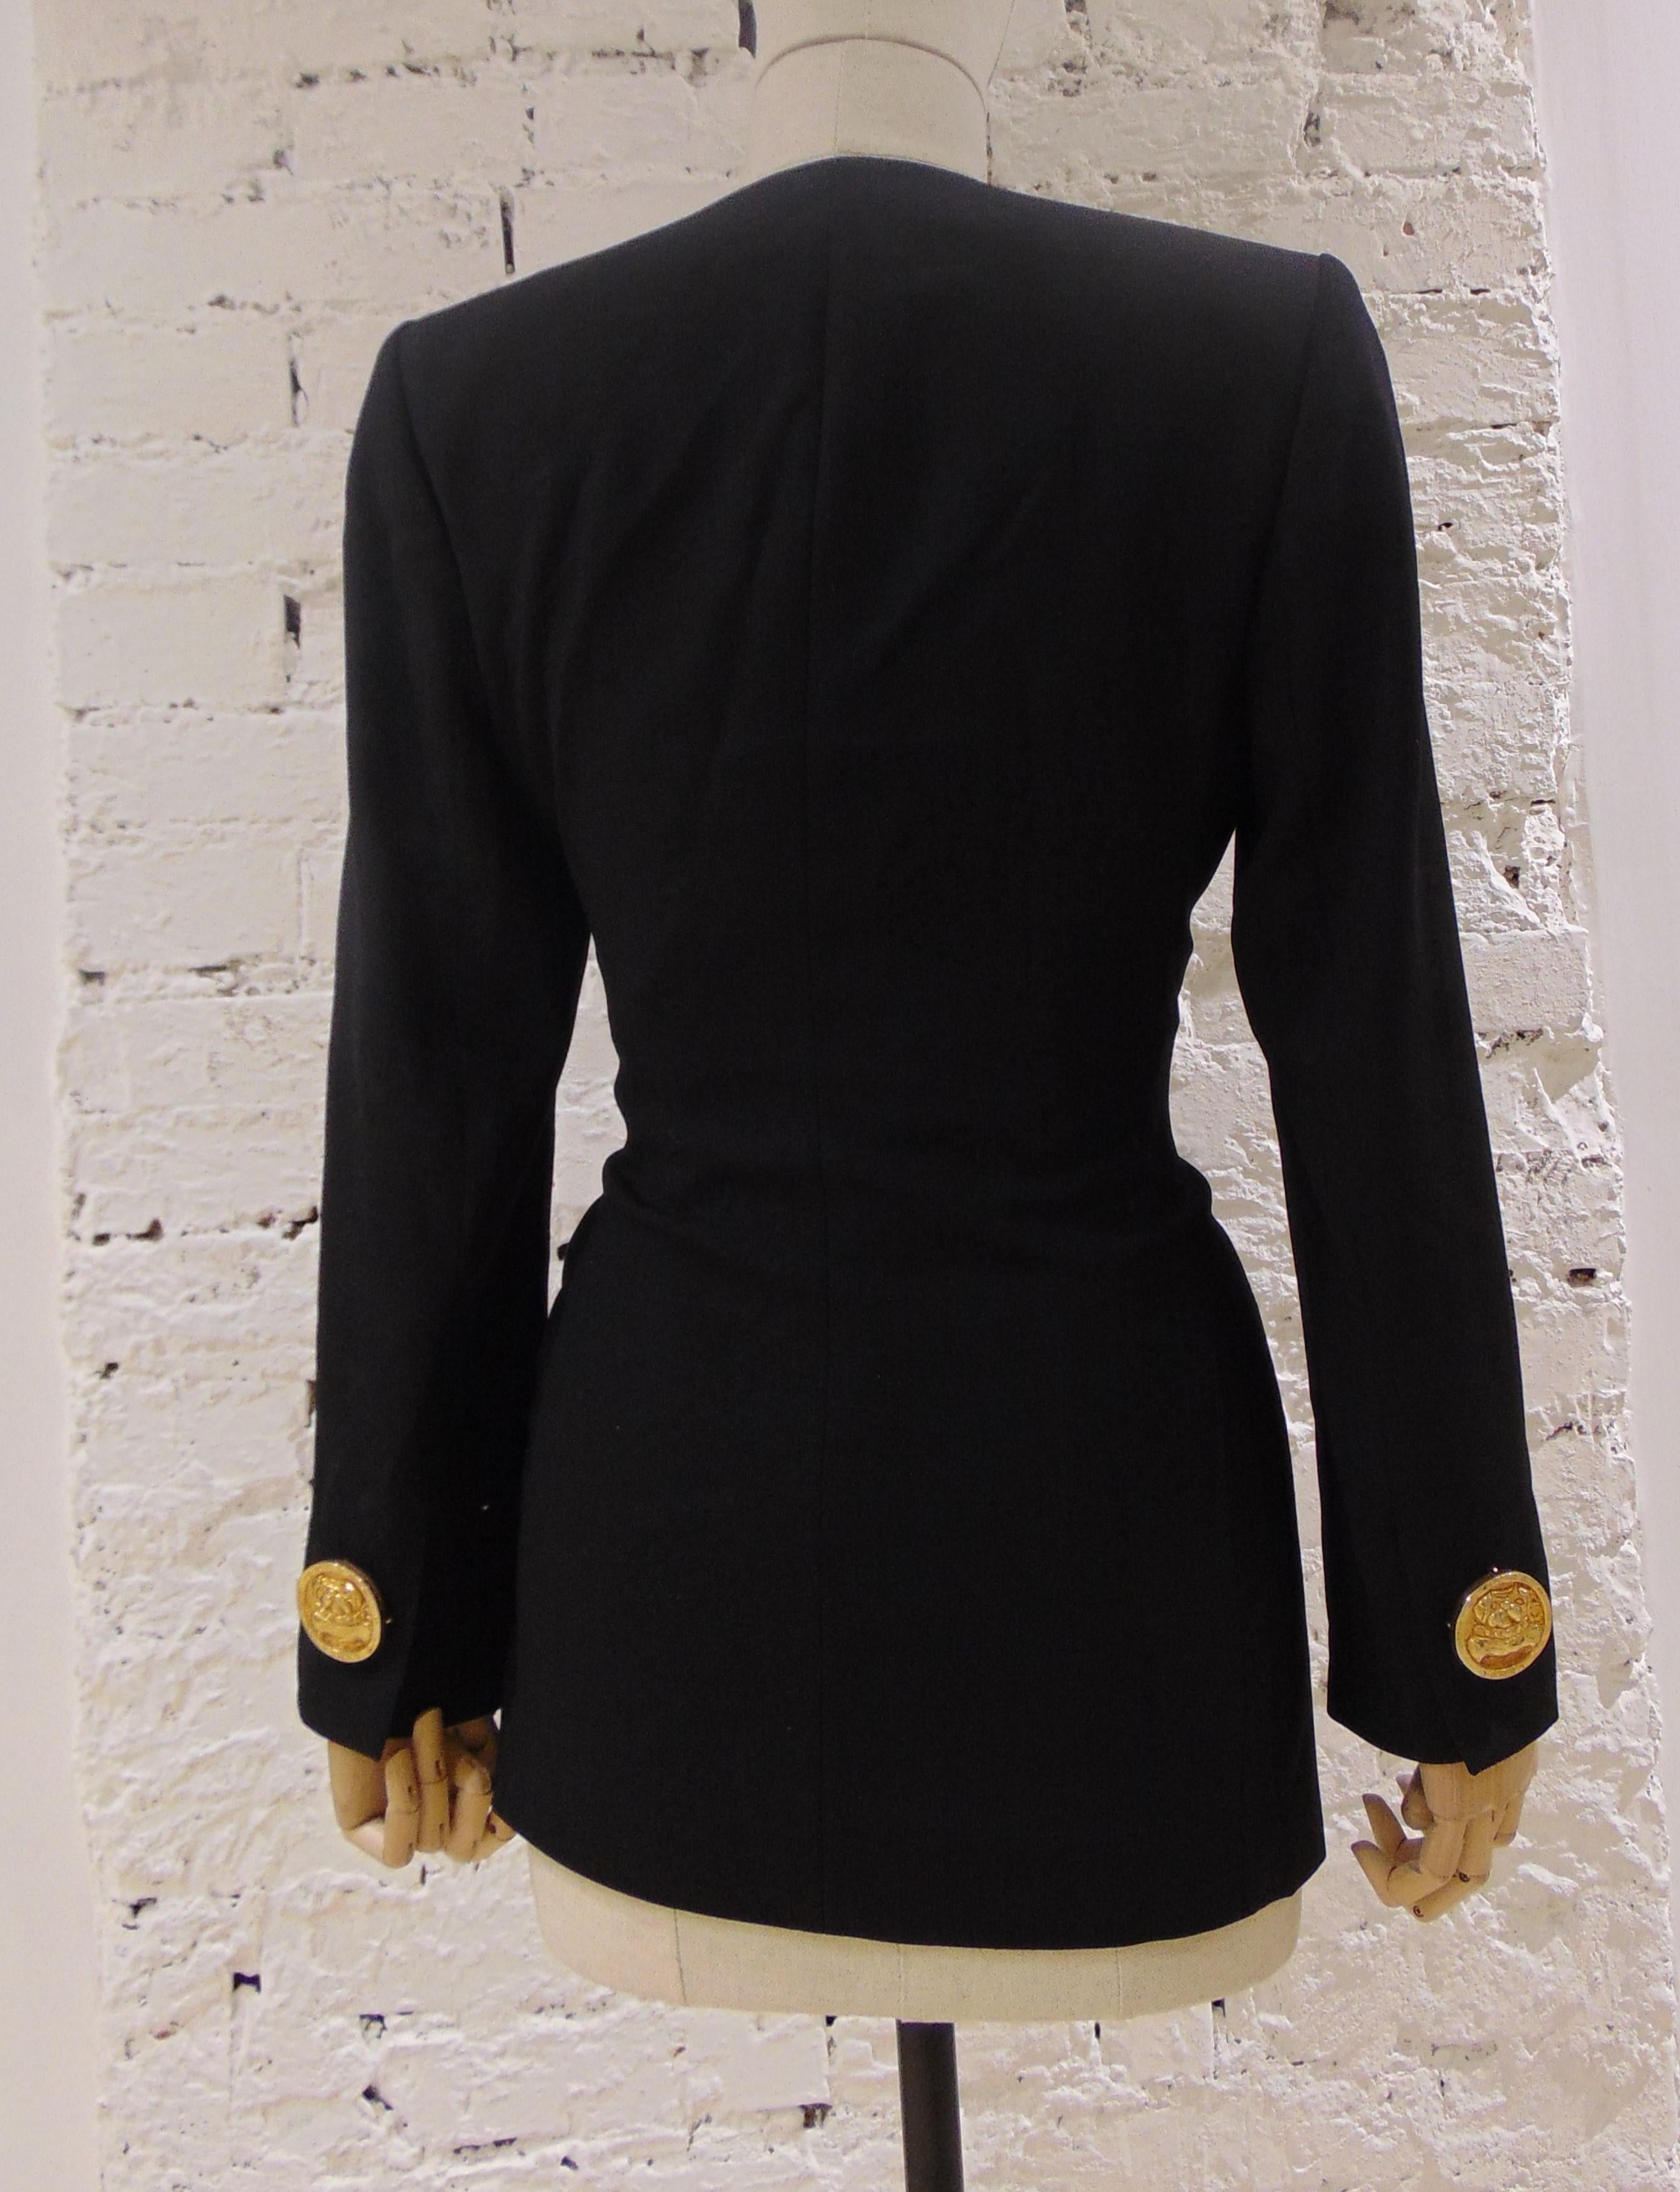 Rena Lange Black Jacket
Black jacket embellished with gold tone bottons on the fronts
totally made in italy in size 42
